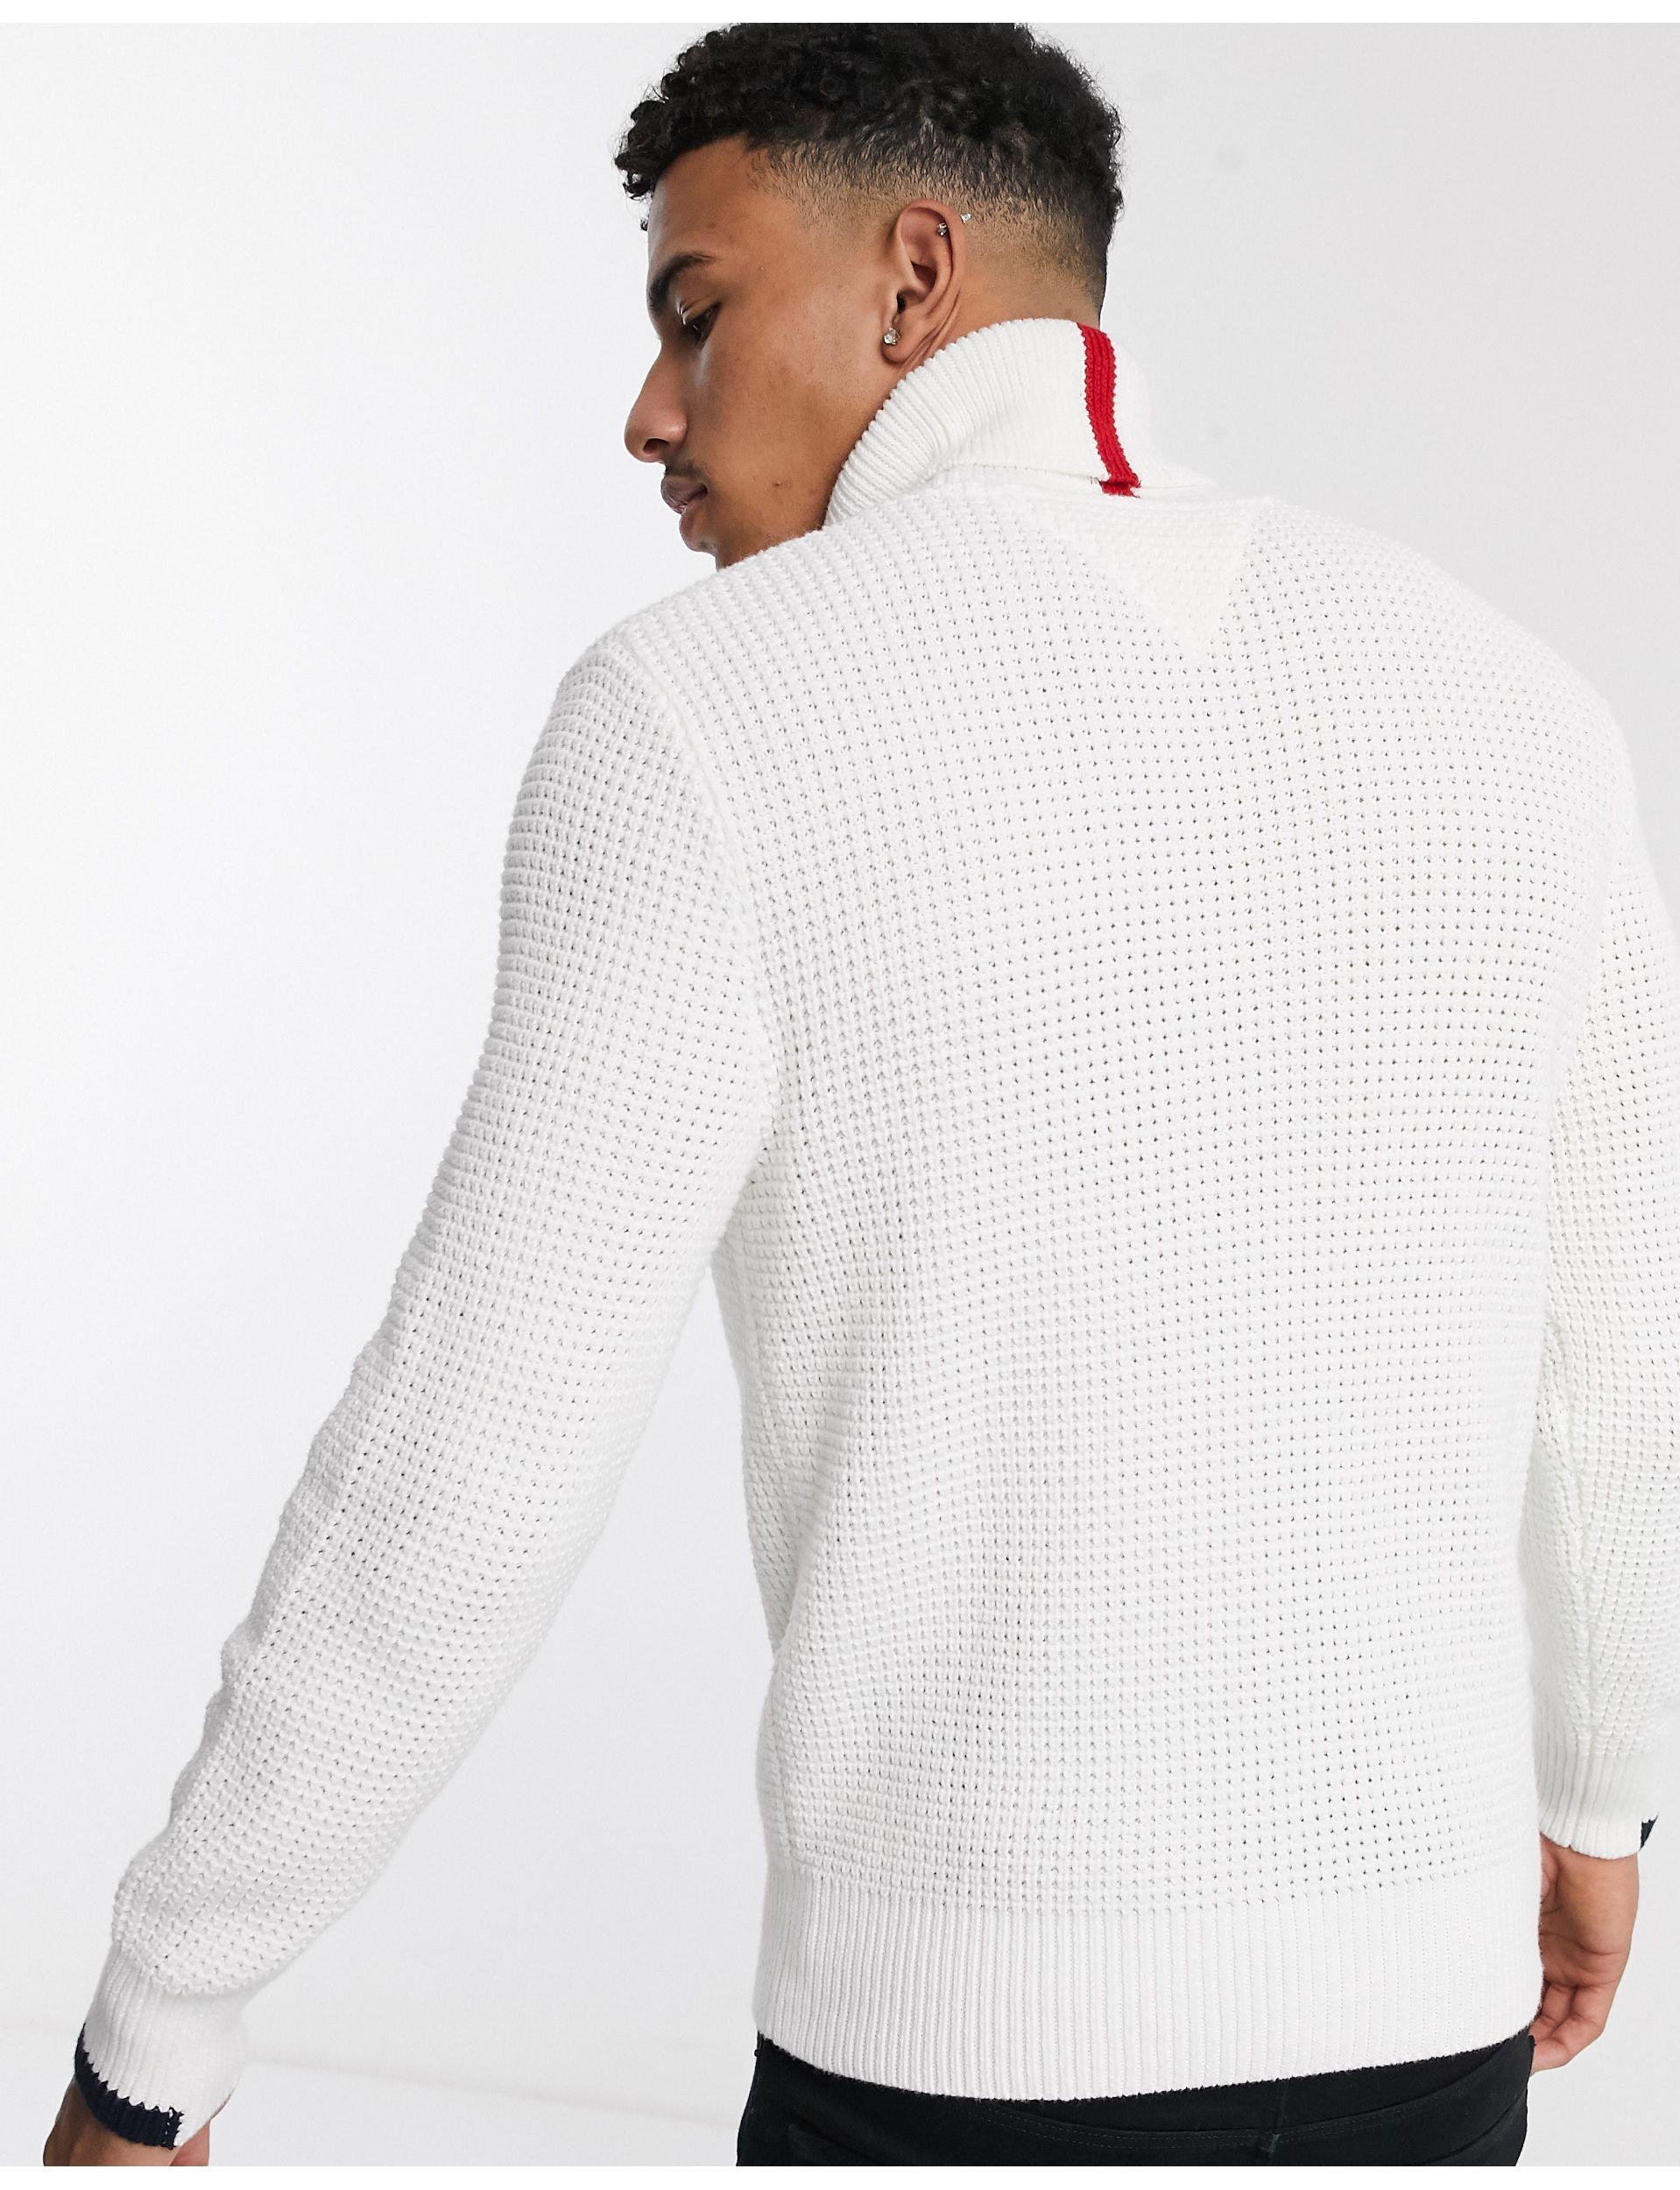 Tommy Hilfiger Trent Knitted Sweater White for Men Lyst